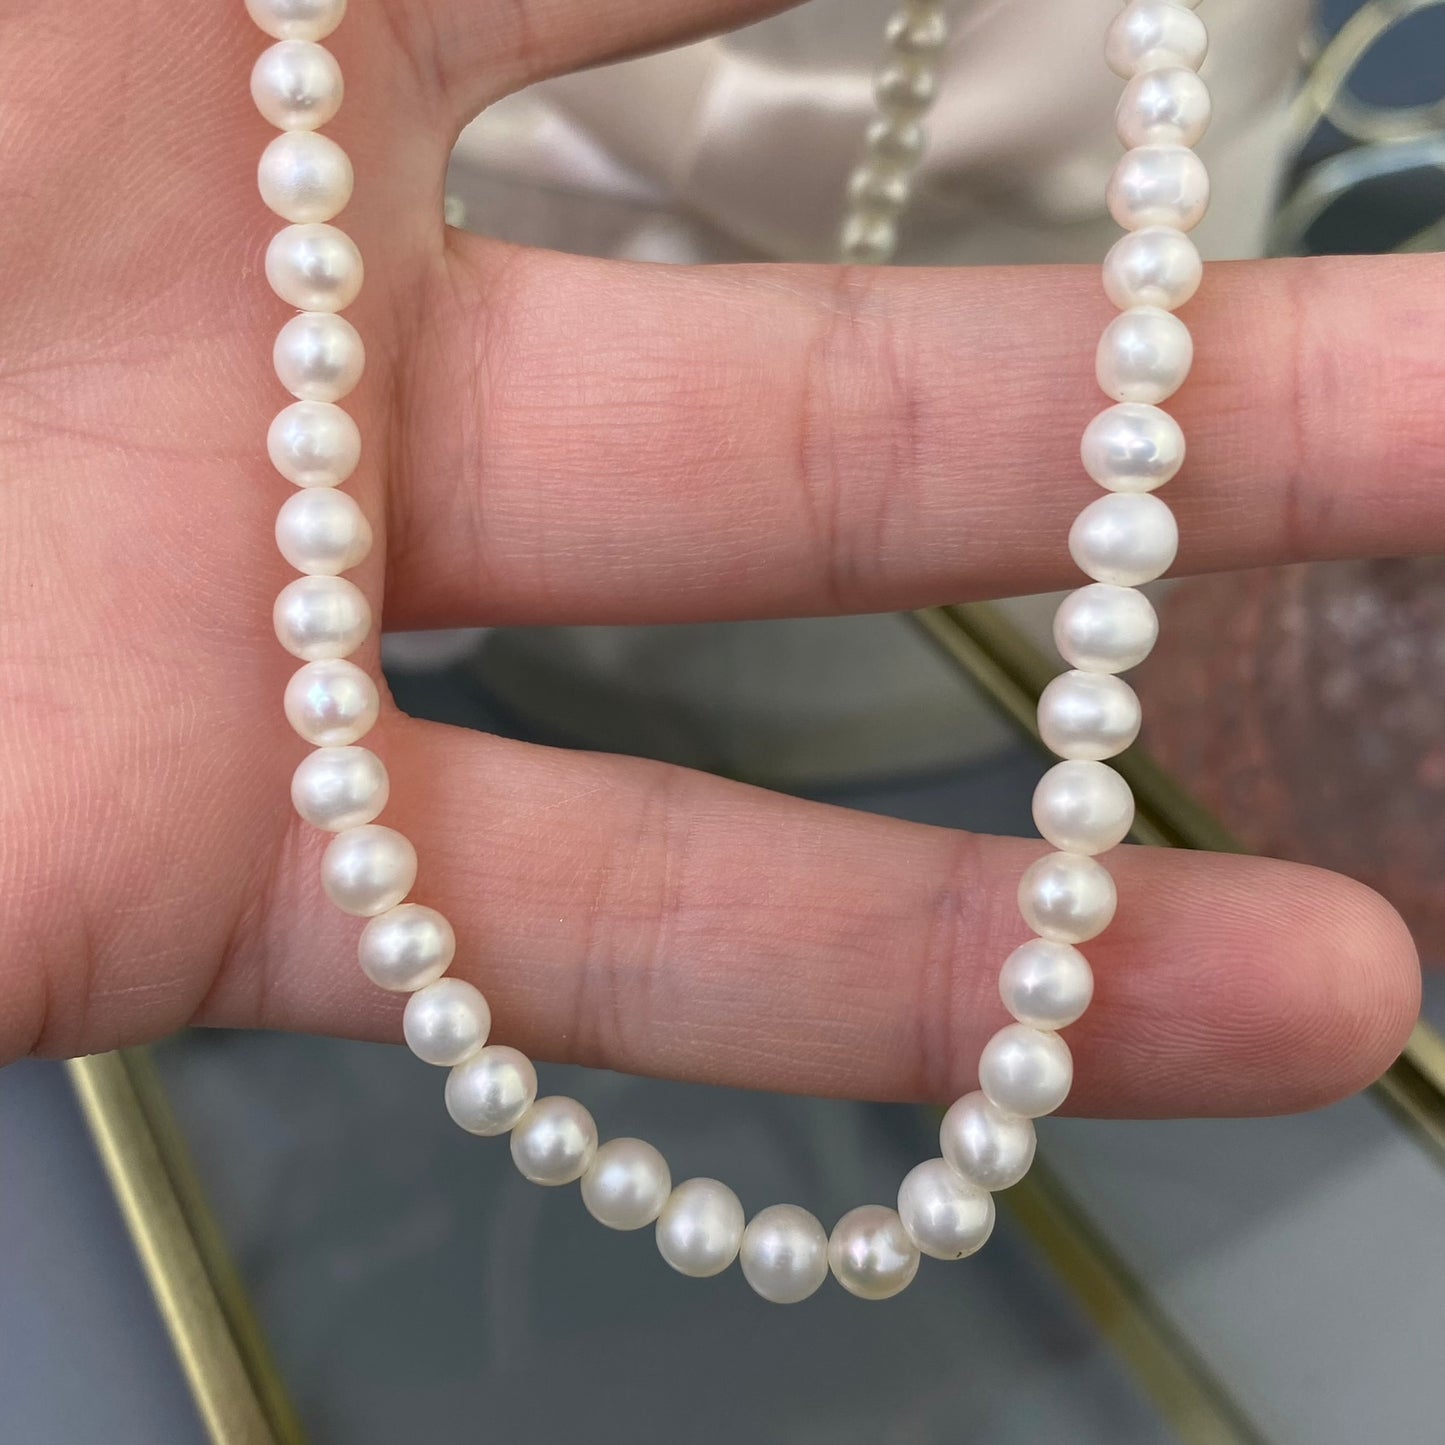 River Pearl necklace (River Pearls 5mm, 40cm)